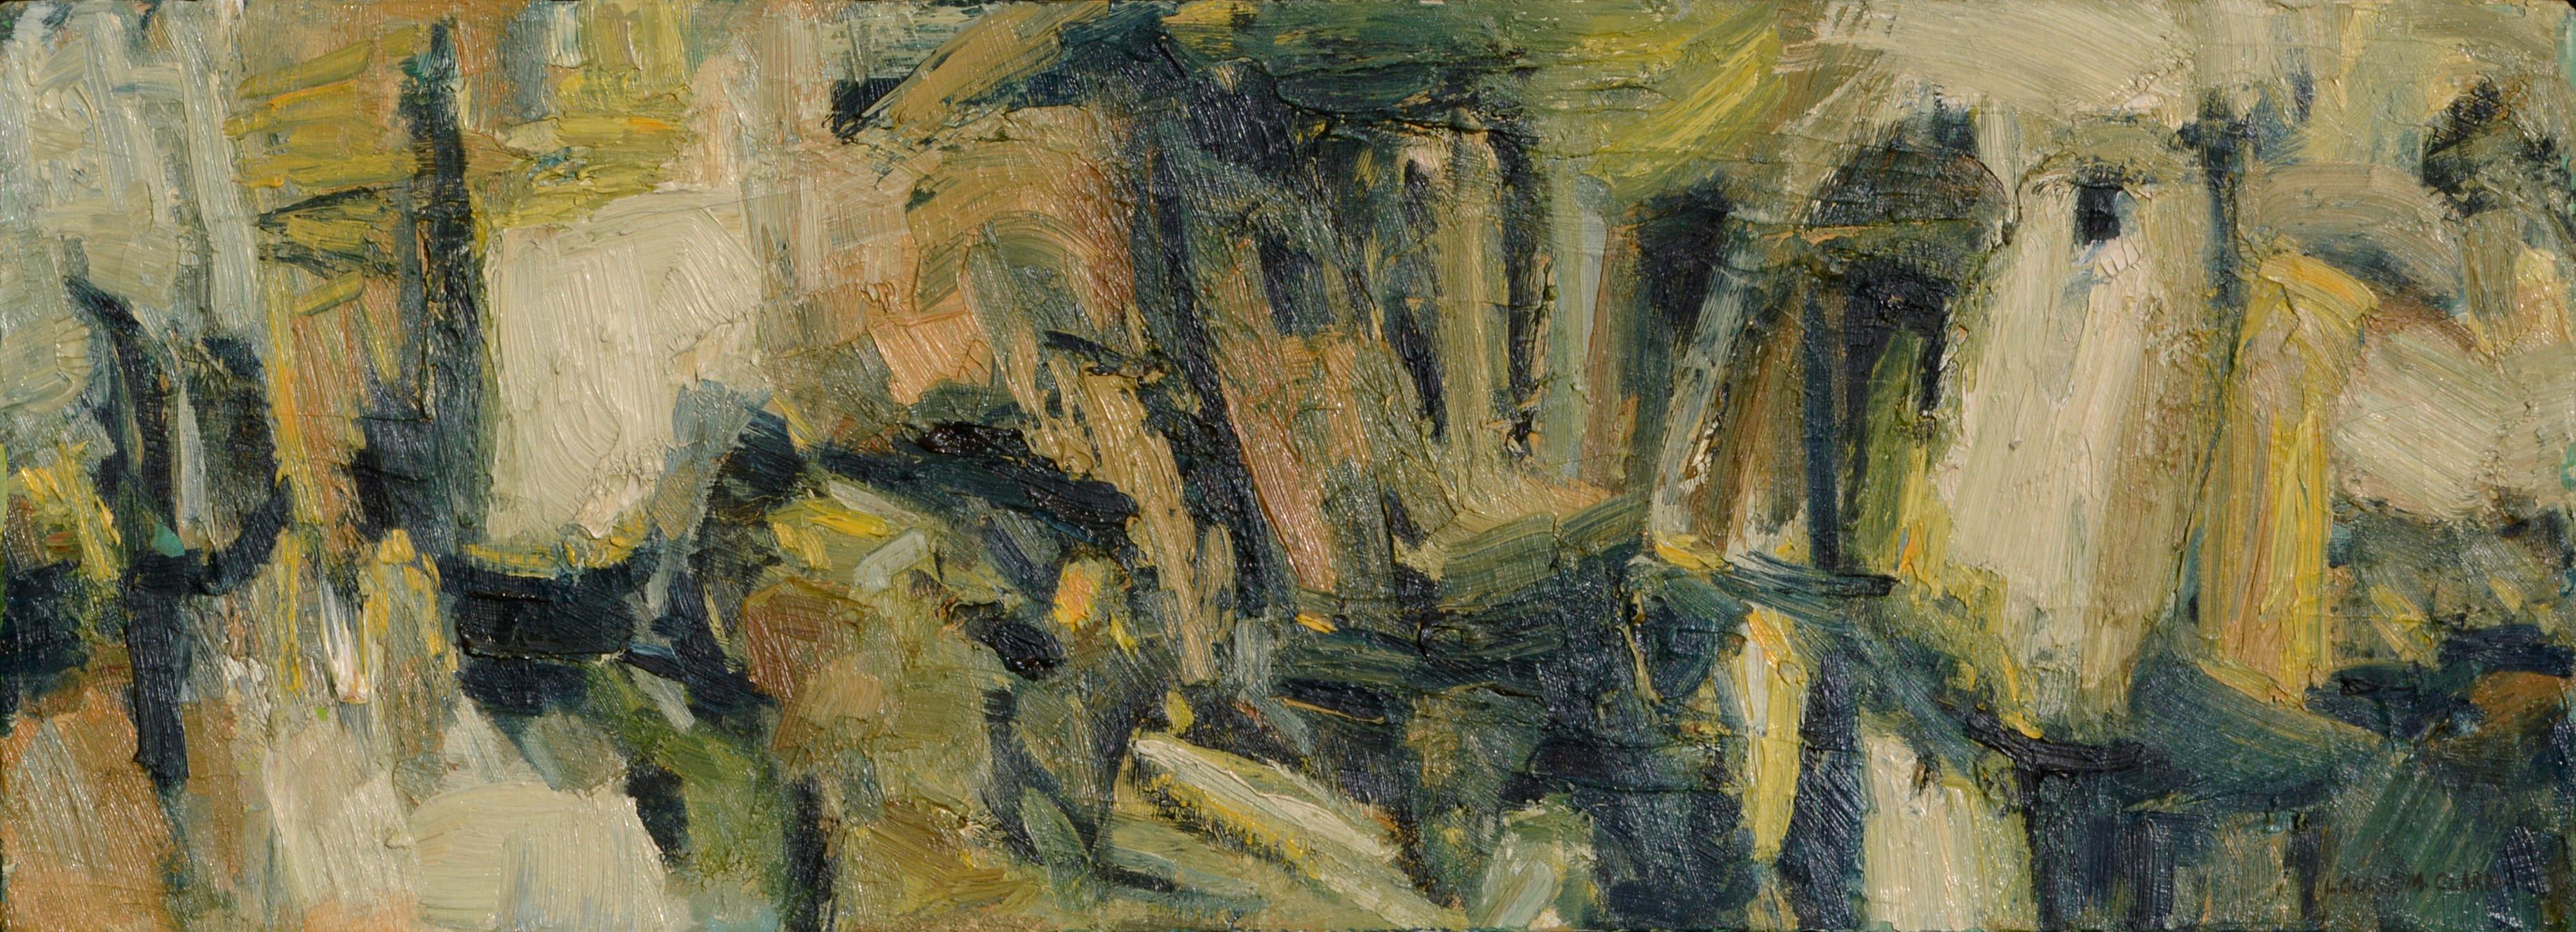 Cliff Dwellings - Green Abstract Landscape Mesa Verde  - Painting by Louise Miller Clark